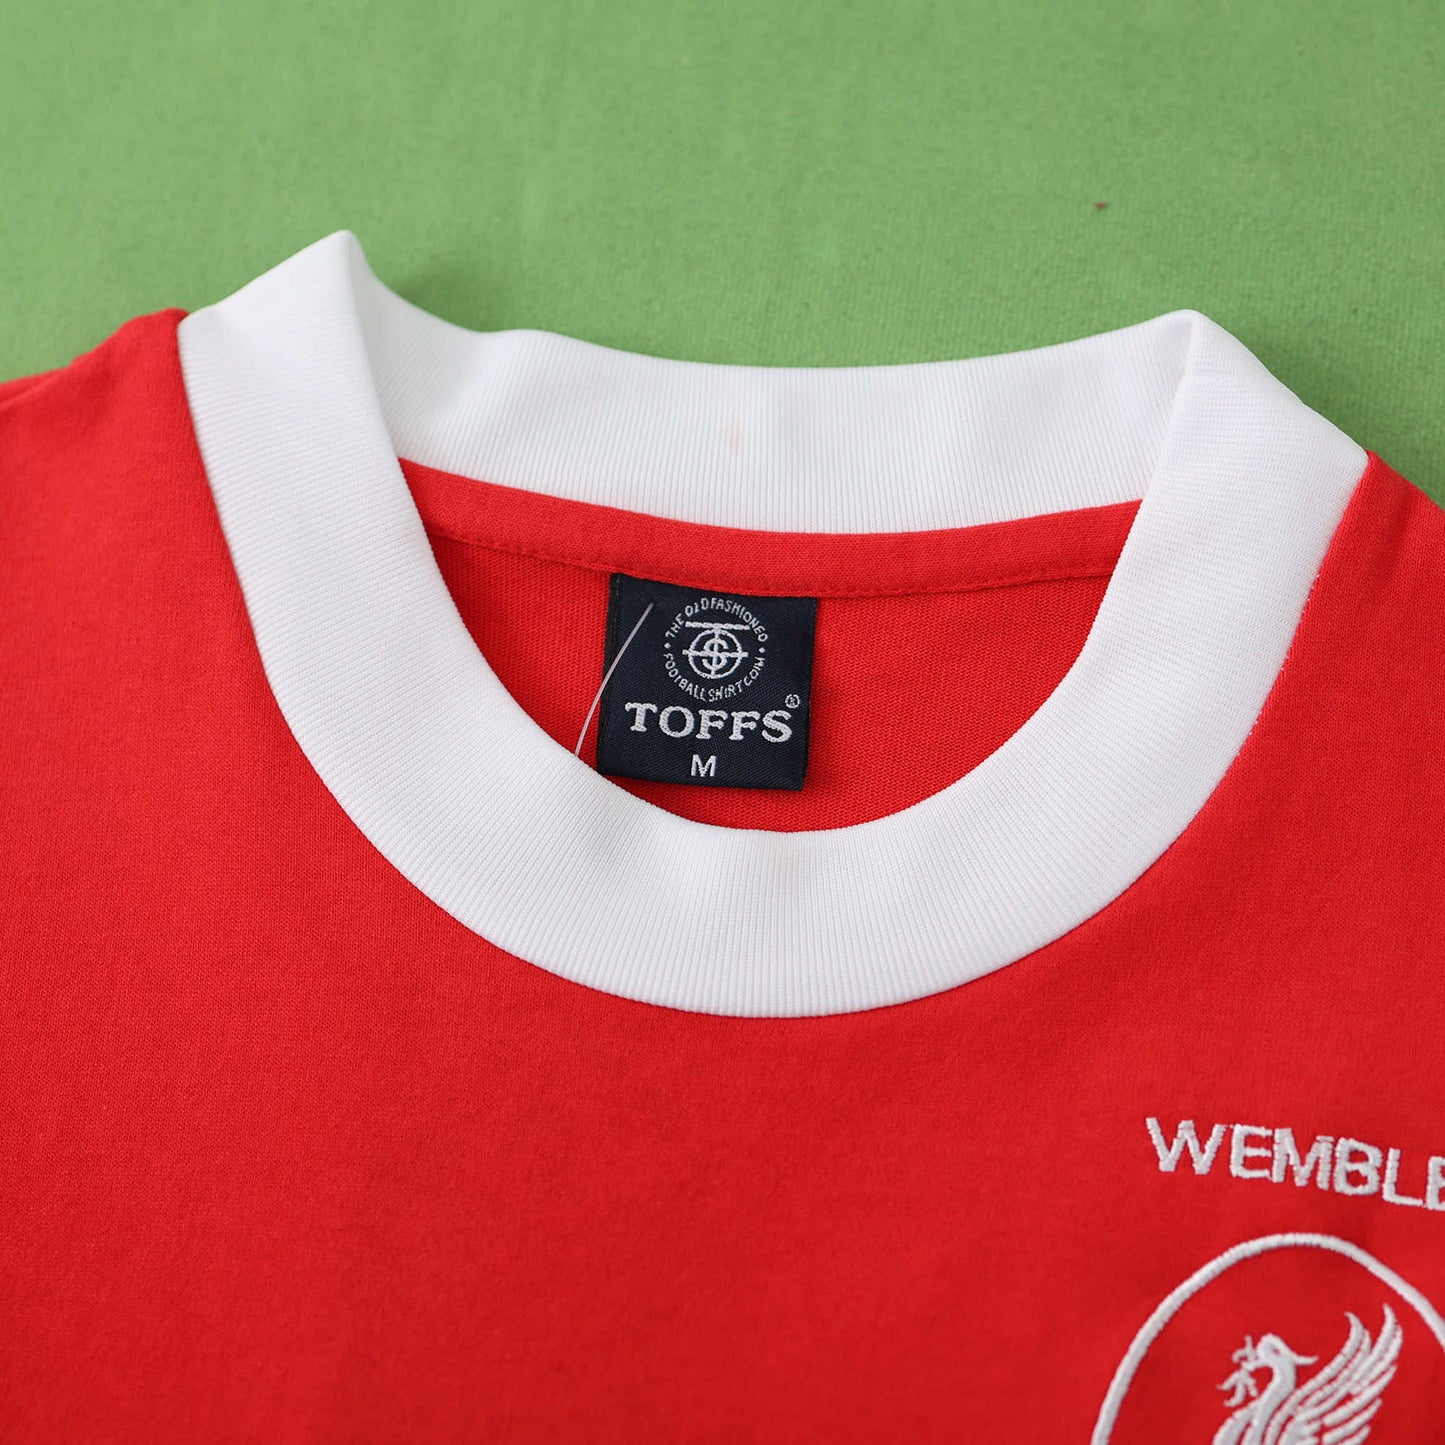 Liverpool FC 1965 Cup Final Home Shirt